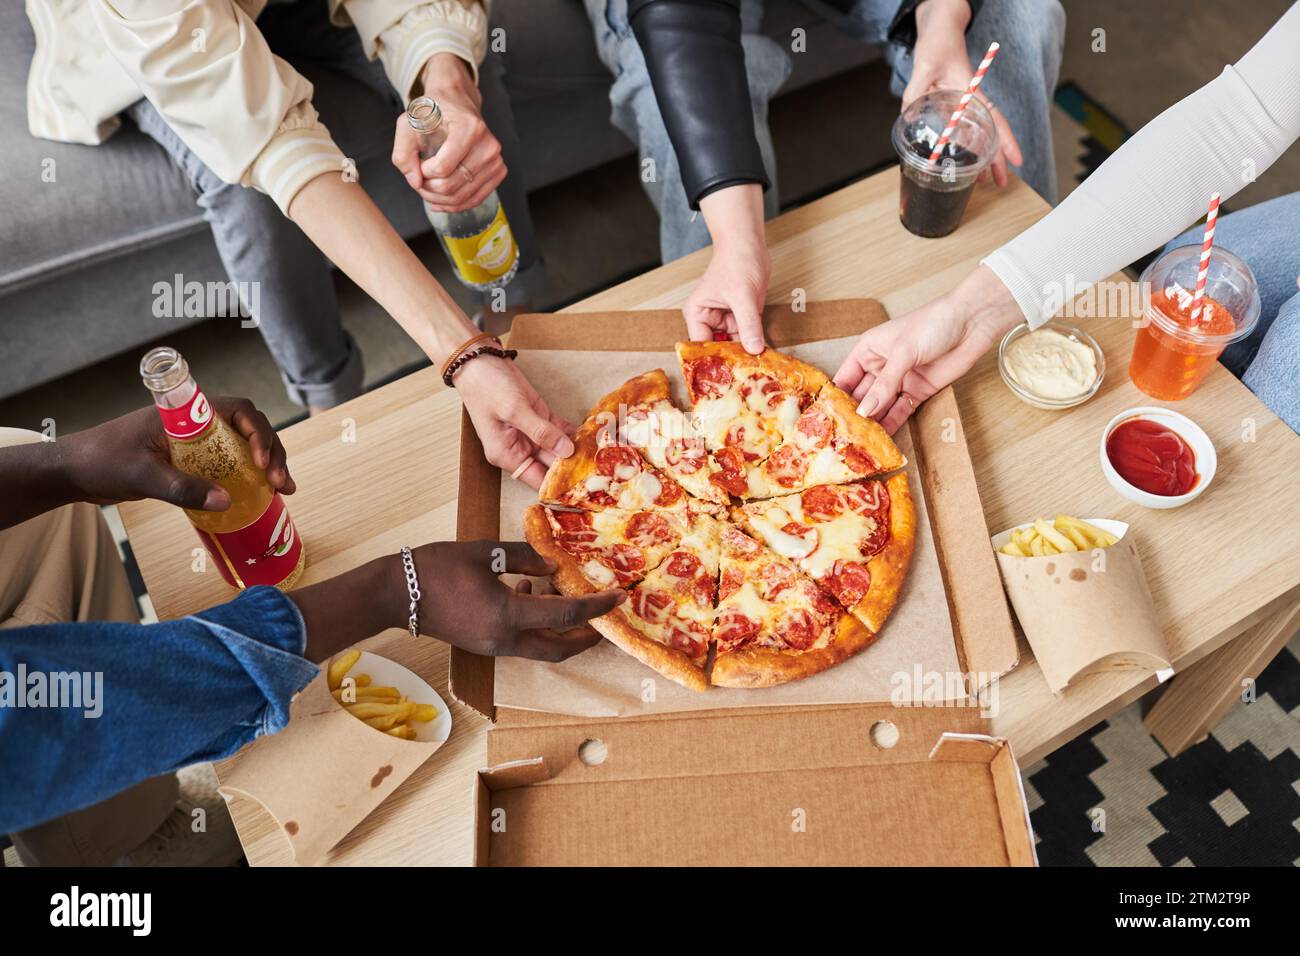 People Taking Pizza Slices at Party Stock Photo